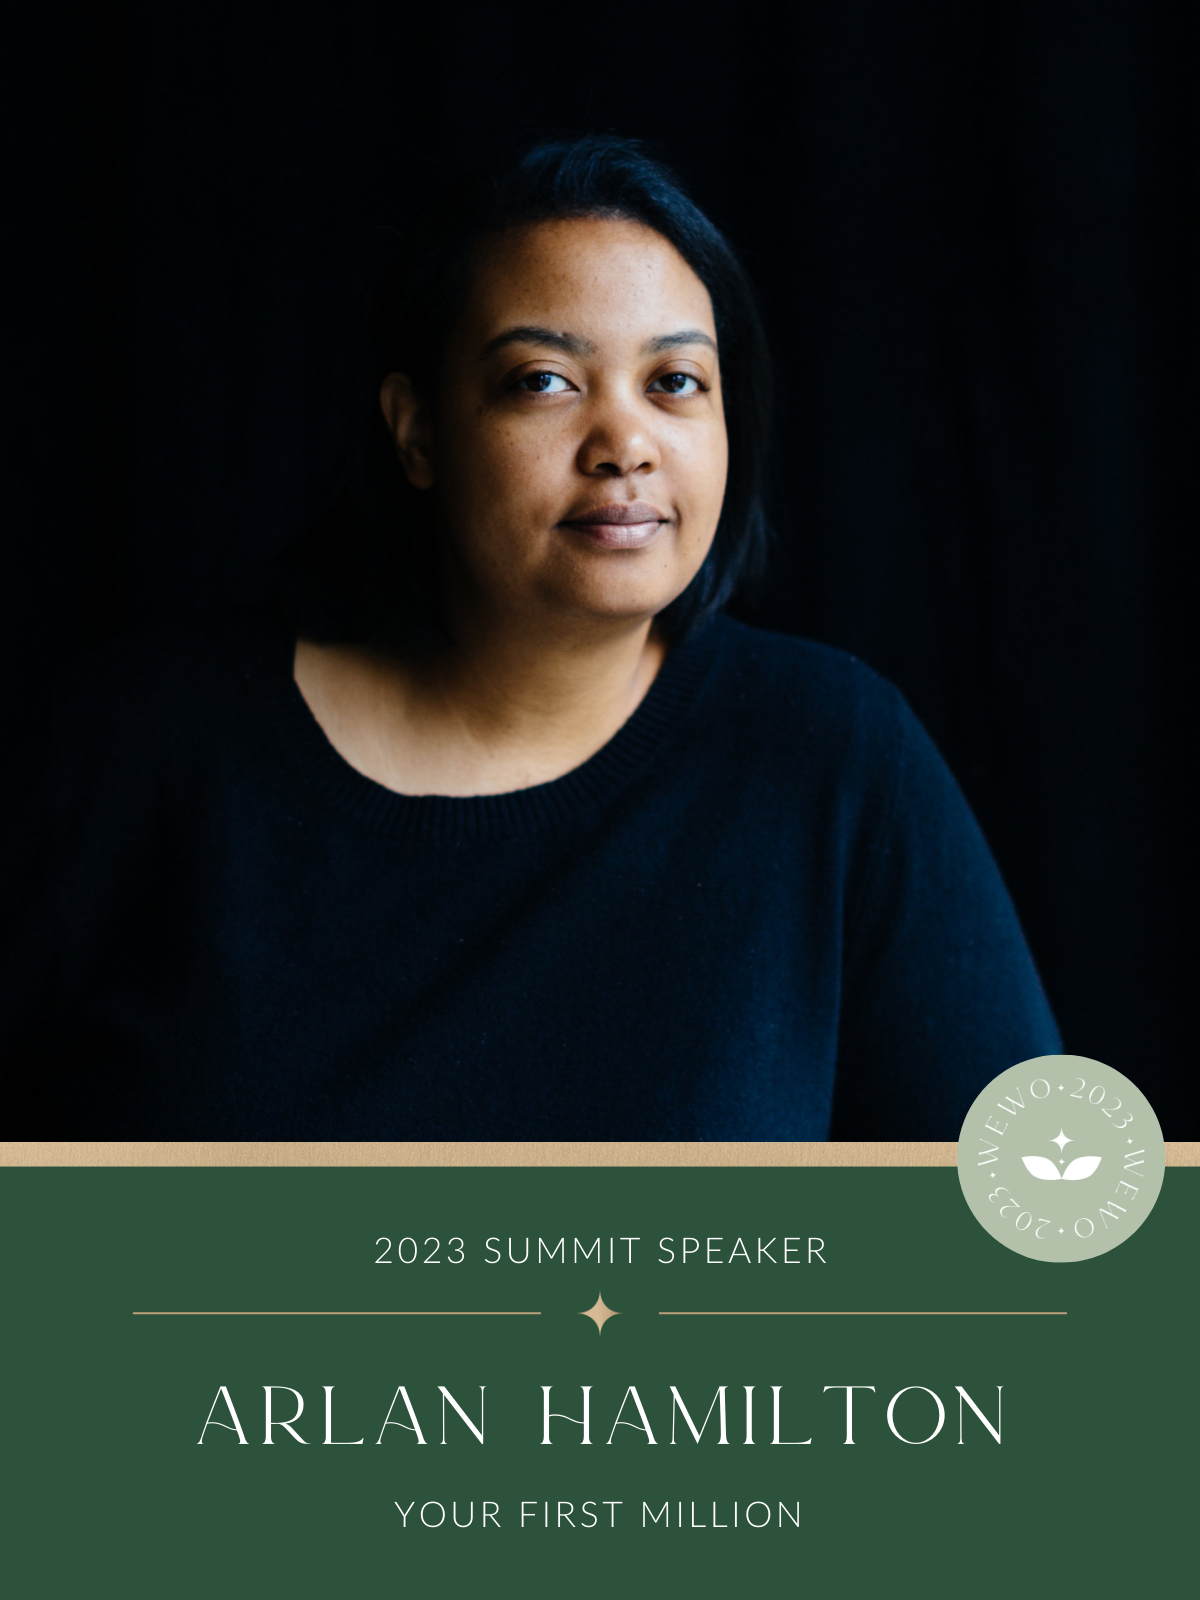 Arlan Hamilton, author of Your First Million and 2023 Wealthy Women Summit Speaker